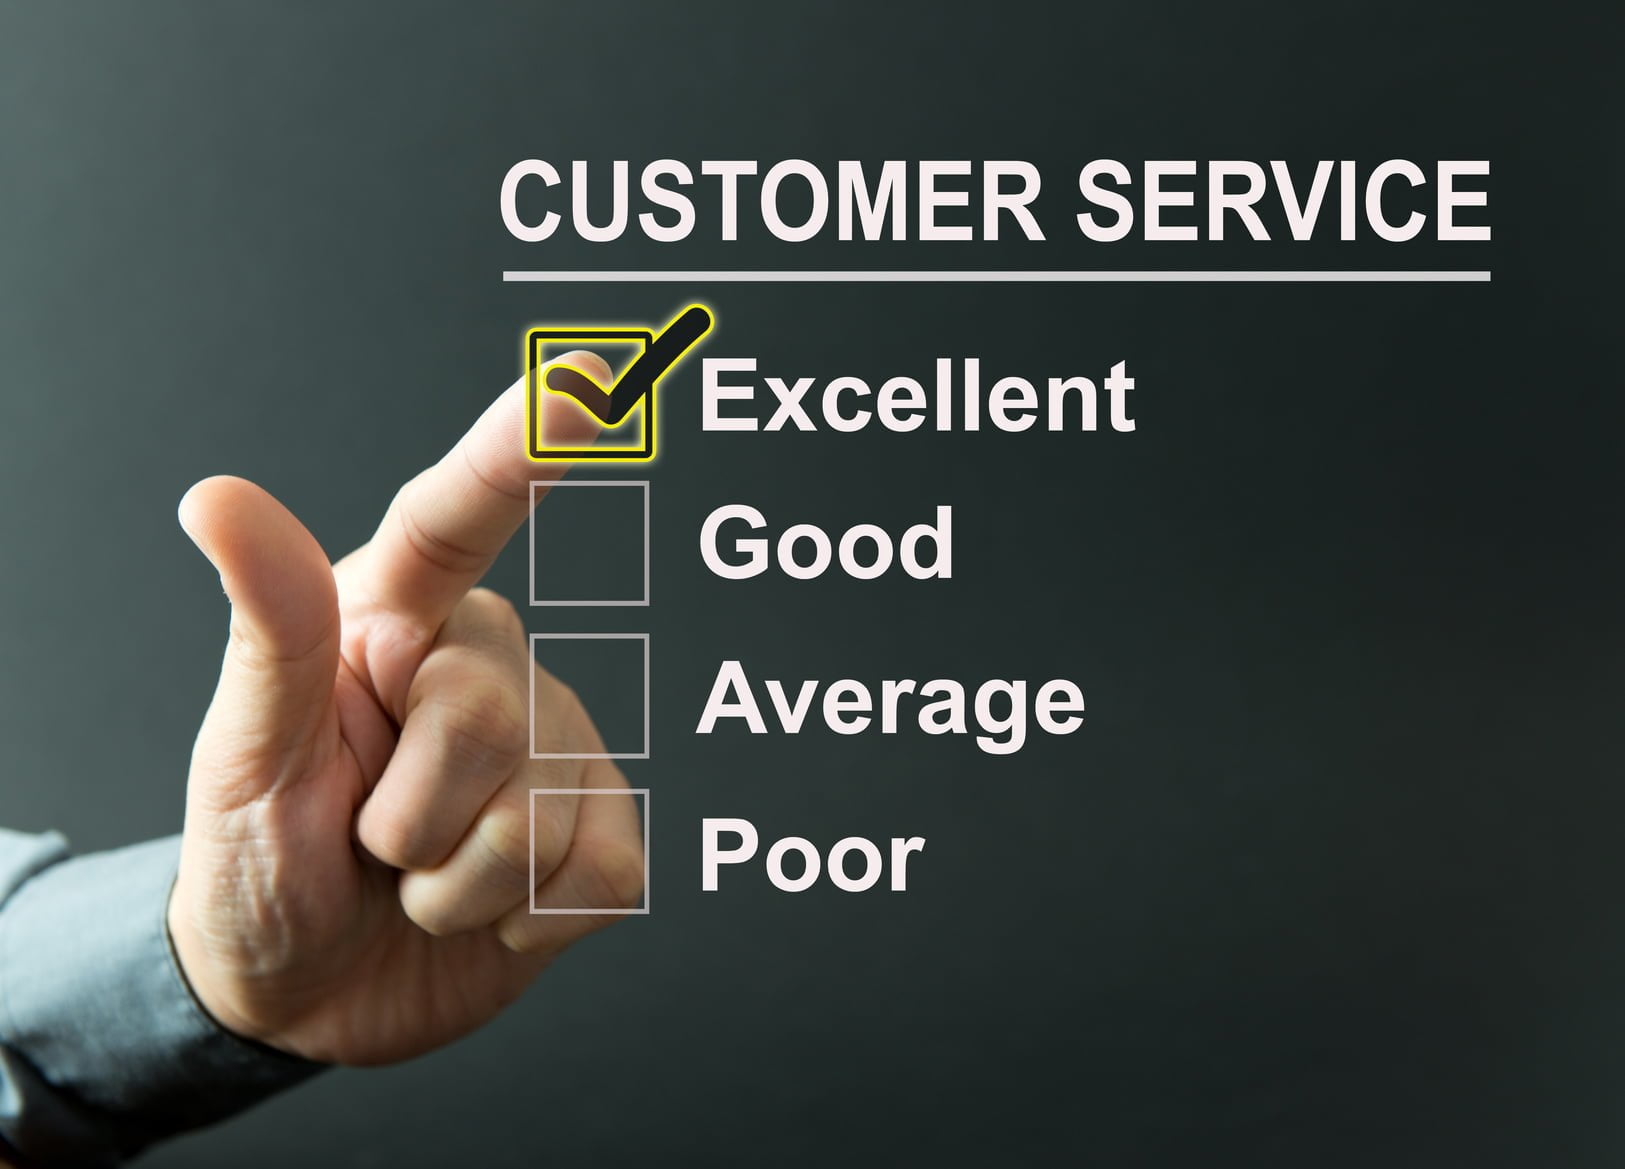 How to Ensure a Great Customer Service Experience